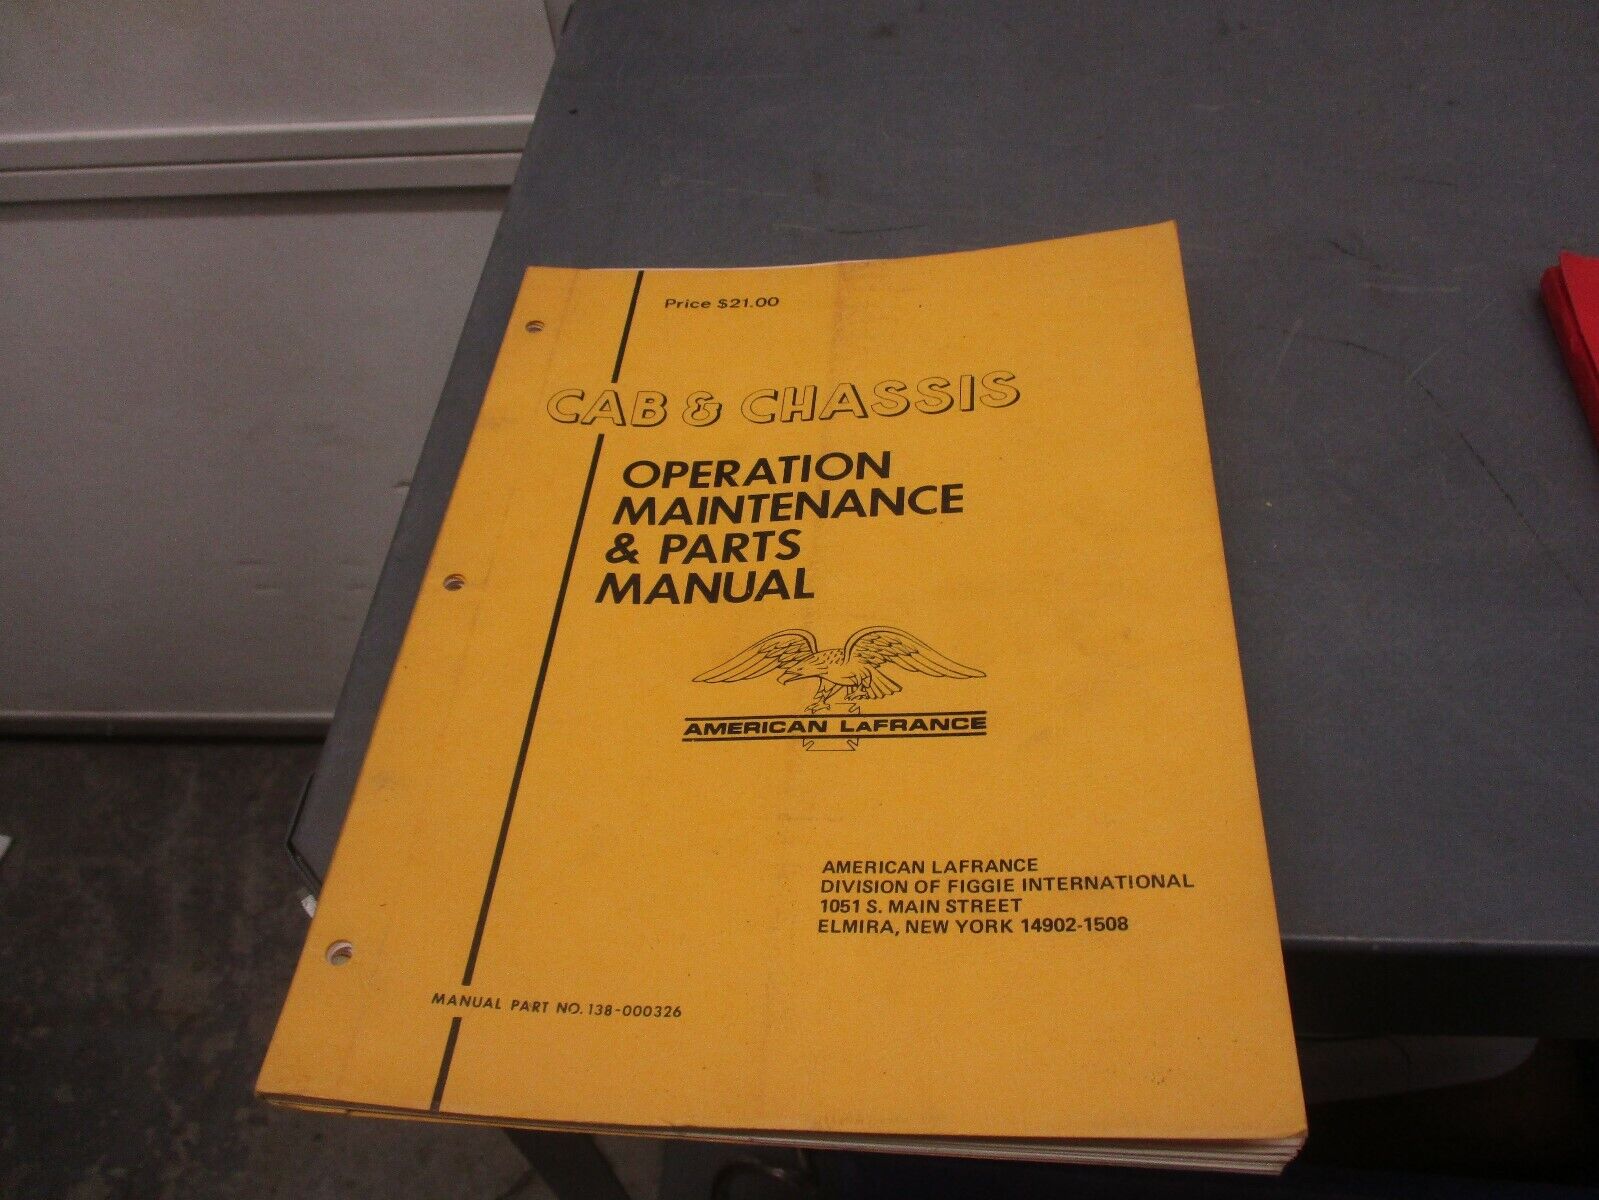 AMERICAN LaFRANCE OPERATION mAINTENANCE PARTS MANUAL  CAB & CHASSIS 